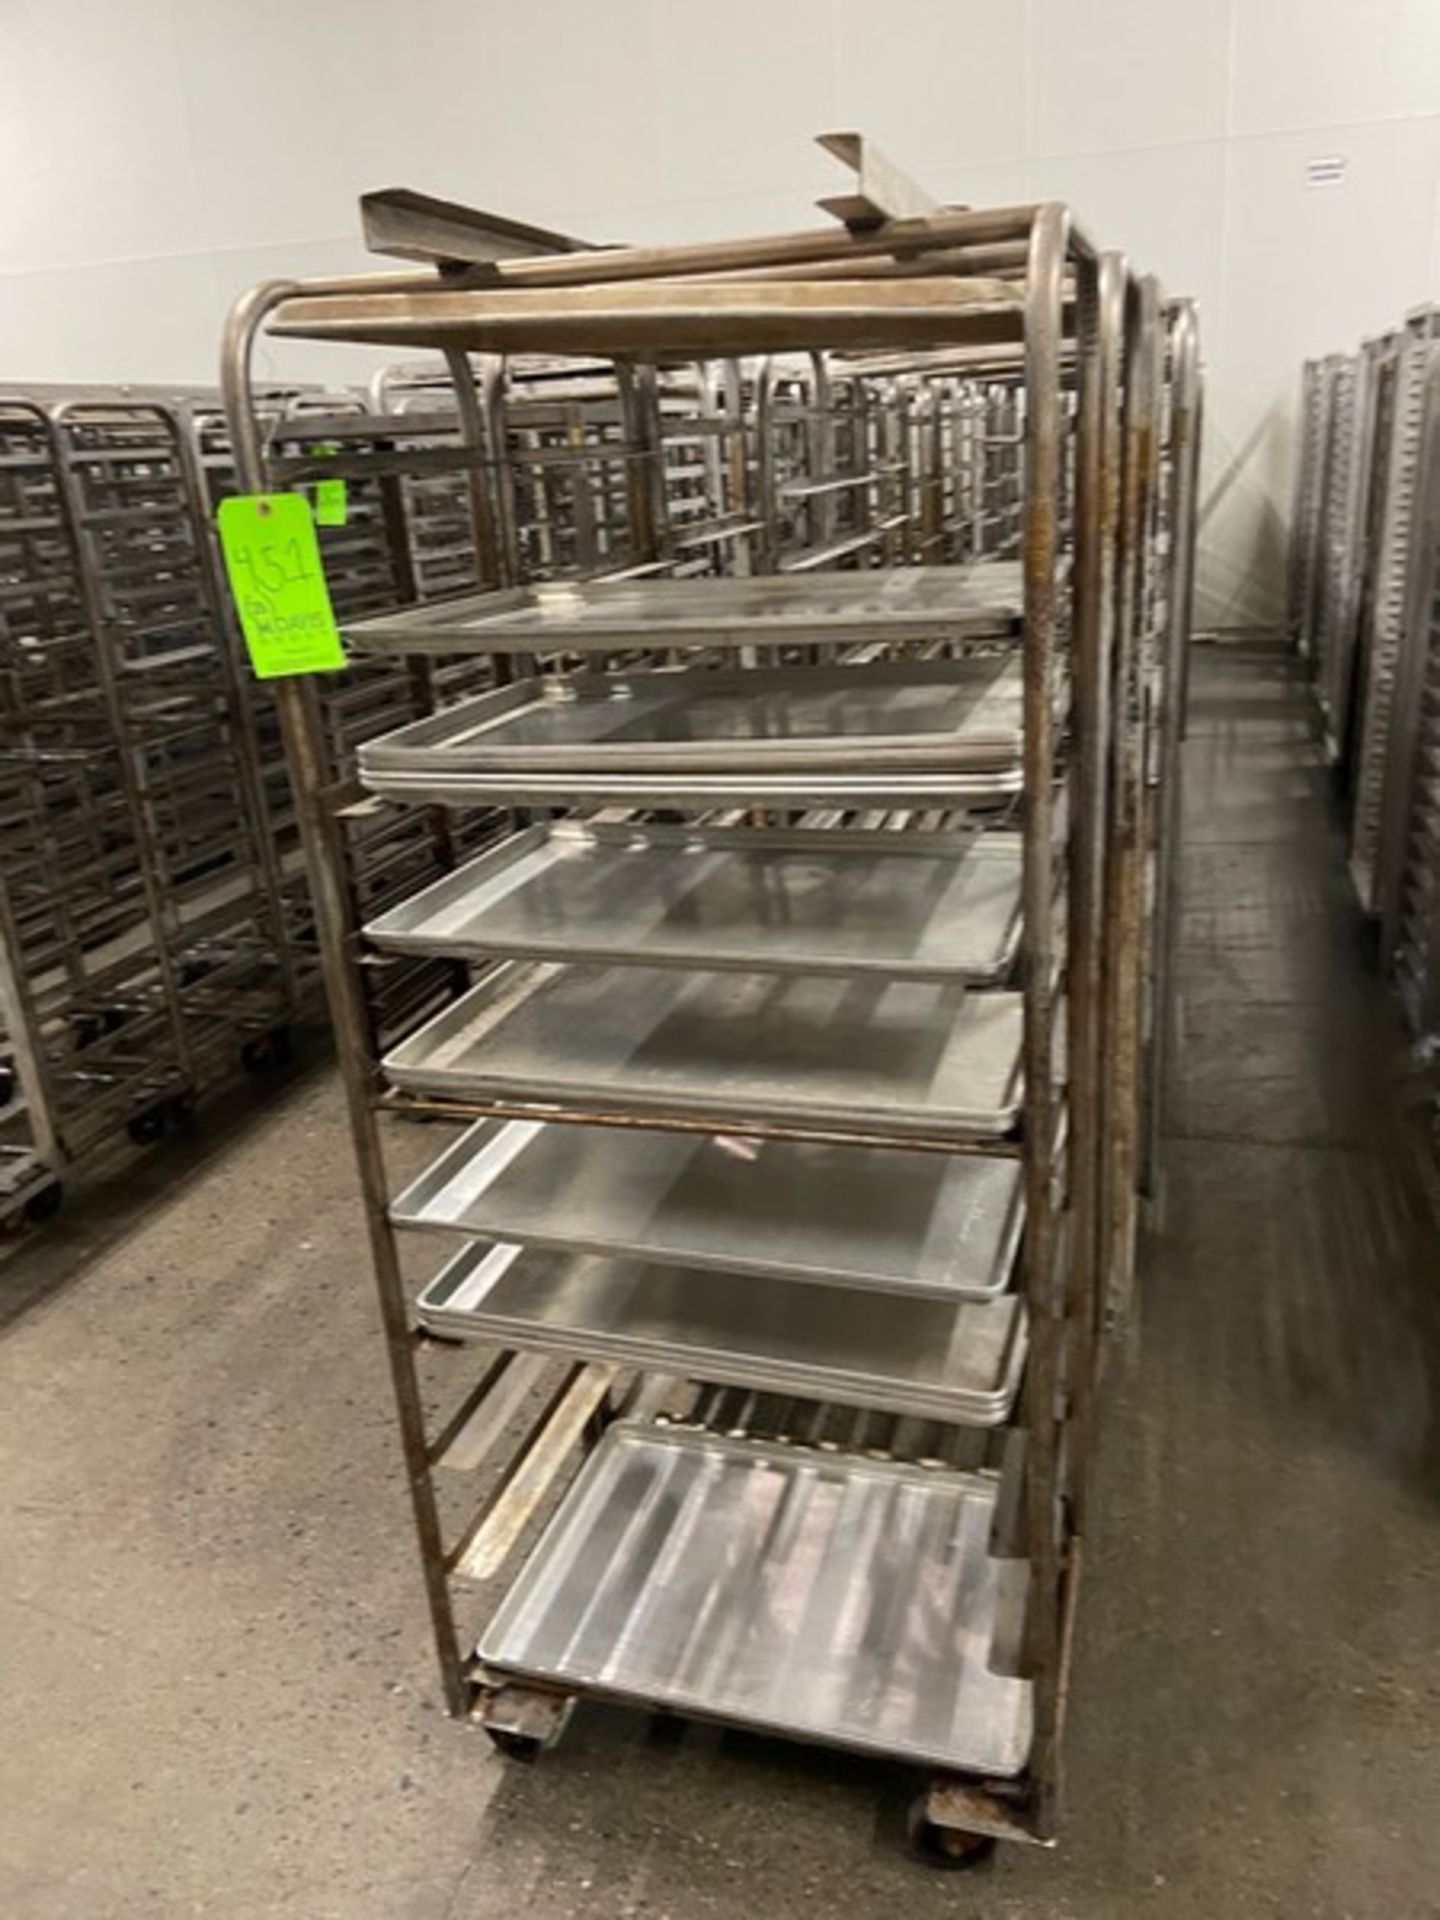 (20) BAKING PAN RACKS, MOUNTED ON CASTERS (LOCATED IN CALLERY, PA) - Image 2 of 4